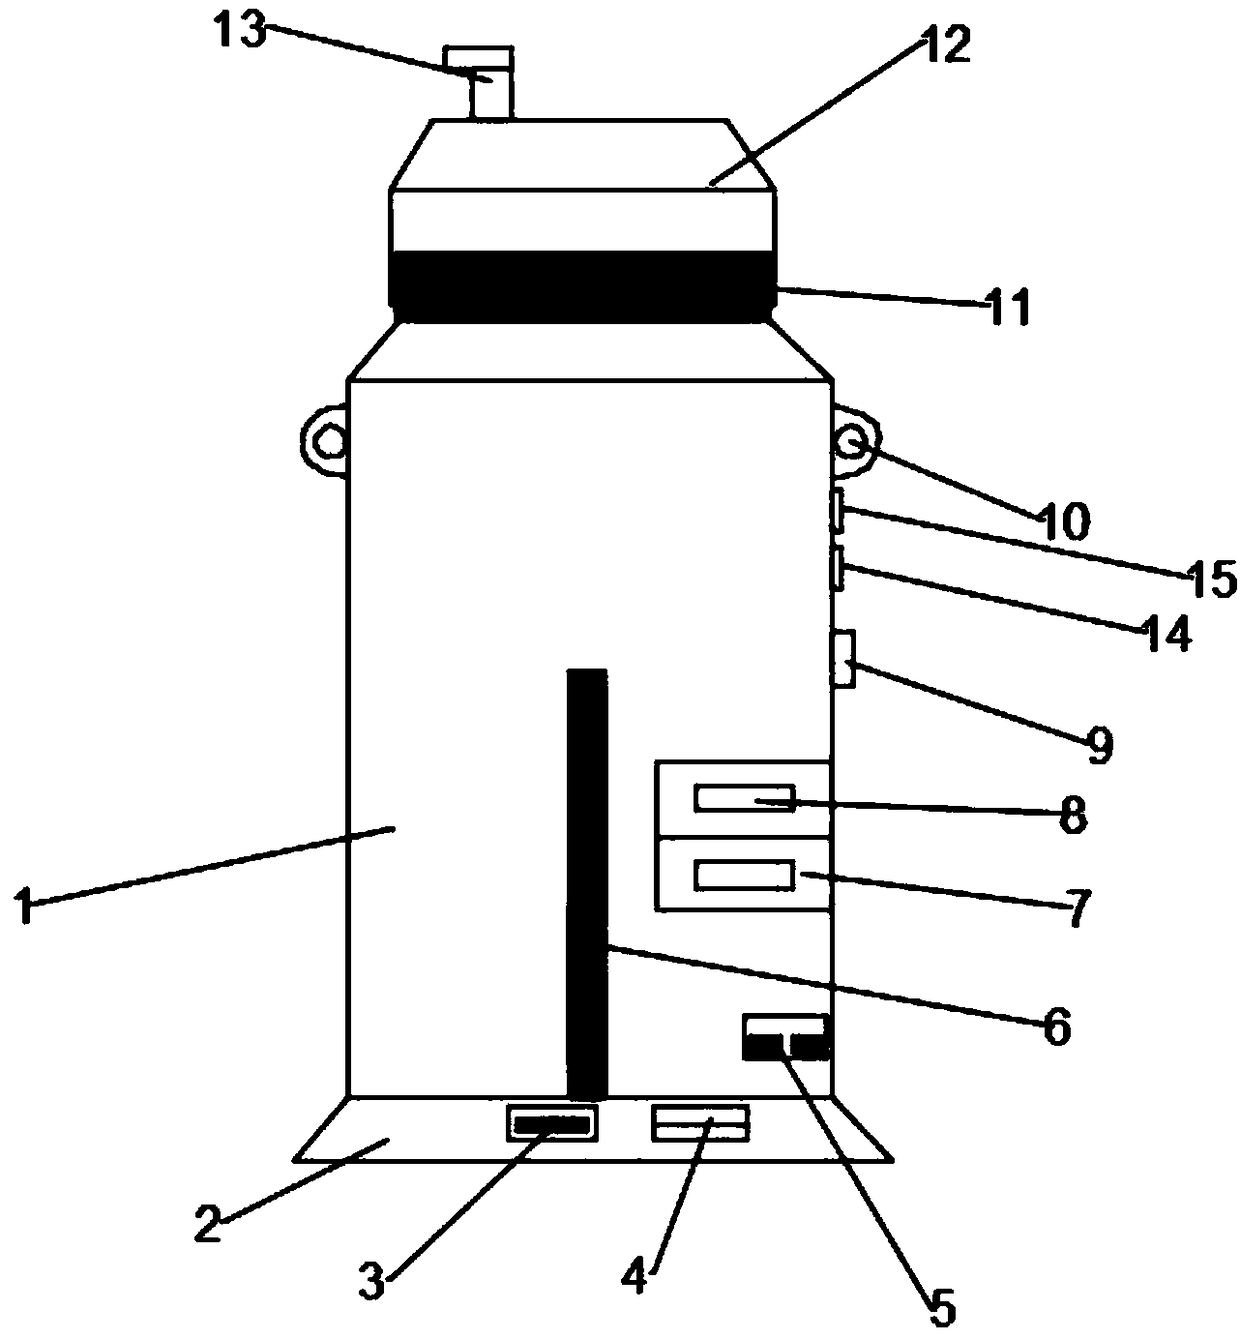 Electronic water cup with multiple purposes